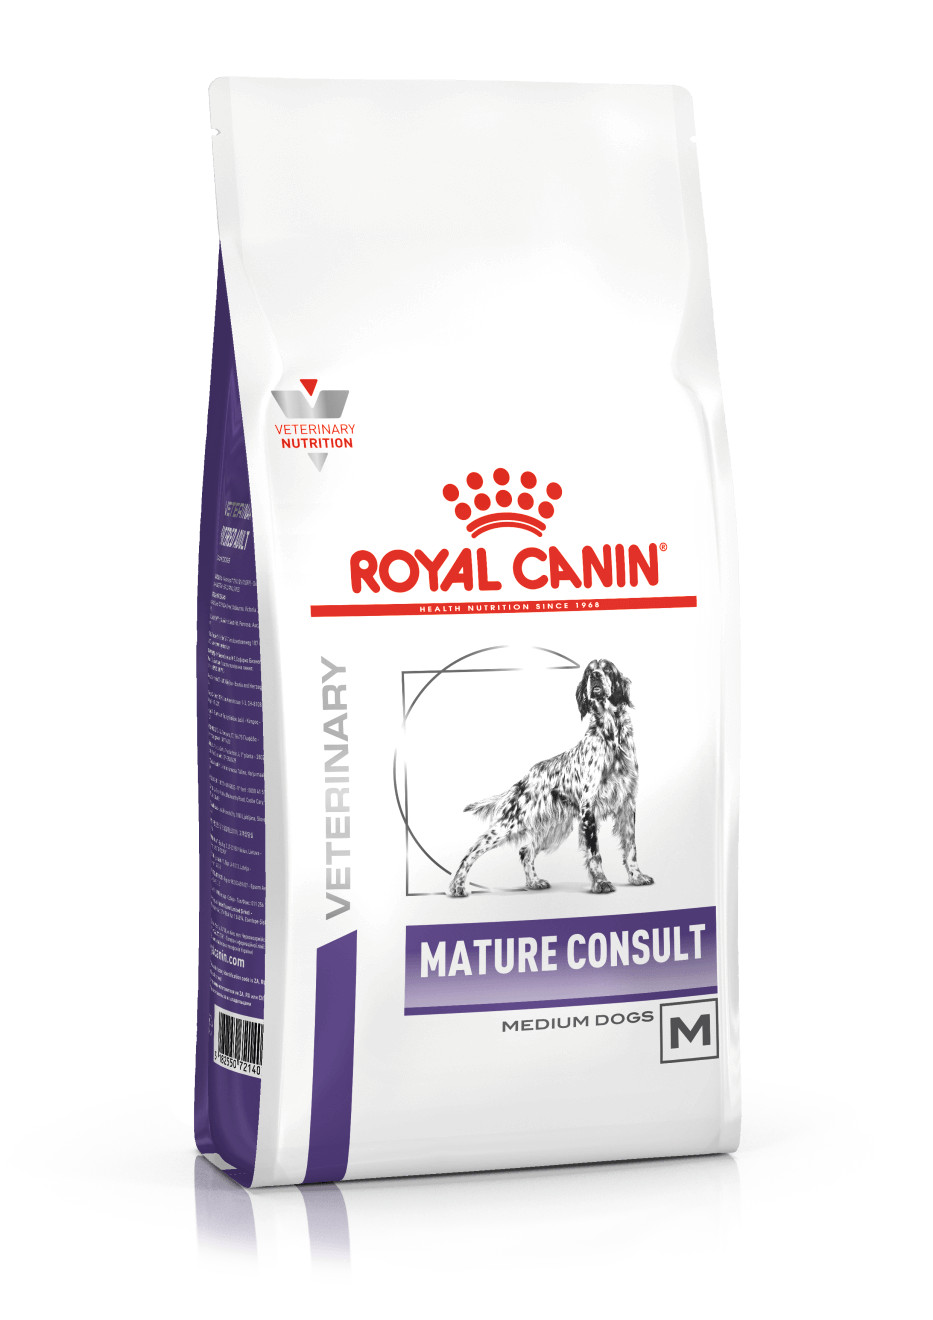 Royal Canin Expert Mature Consult Medium Dogs pour chien